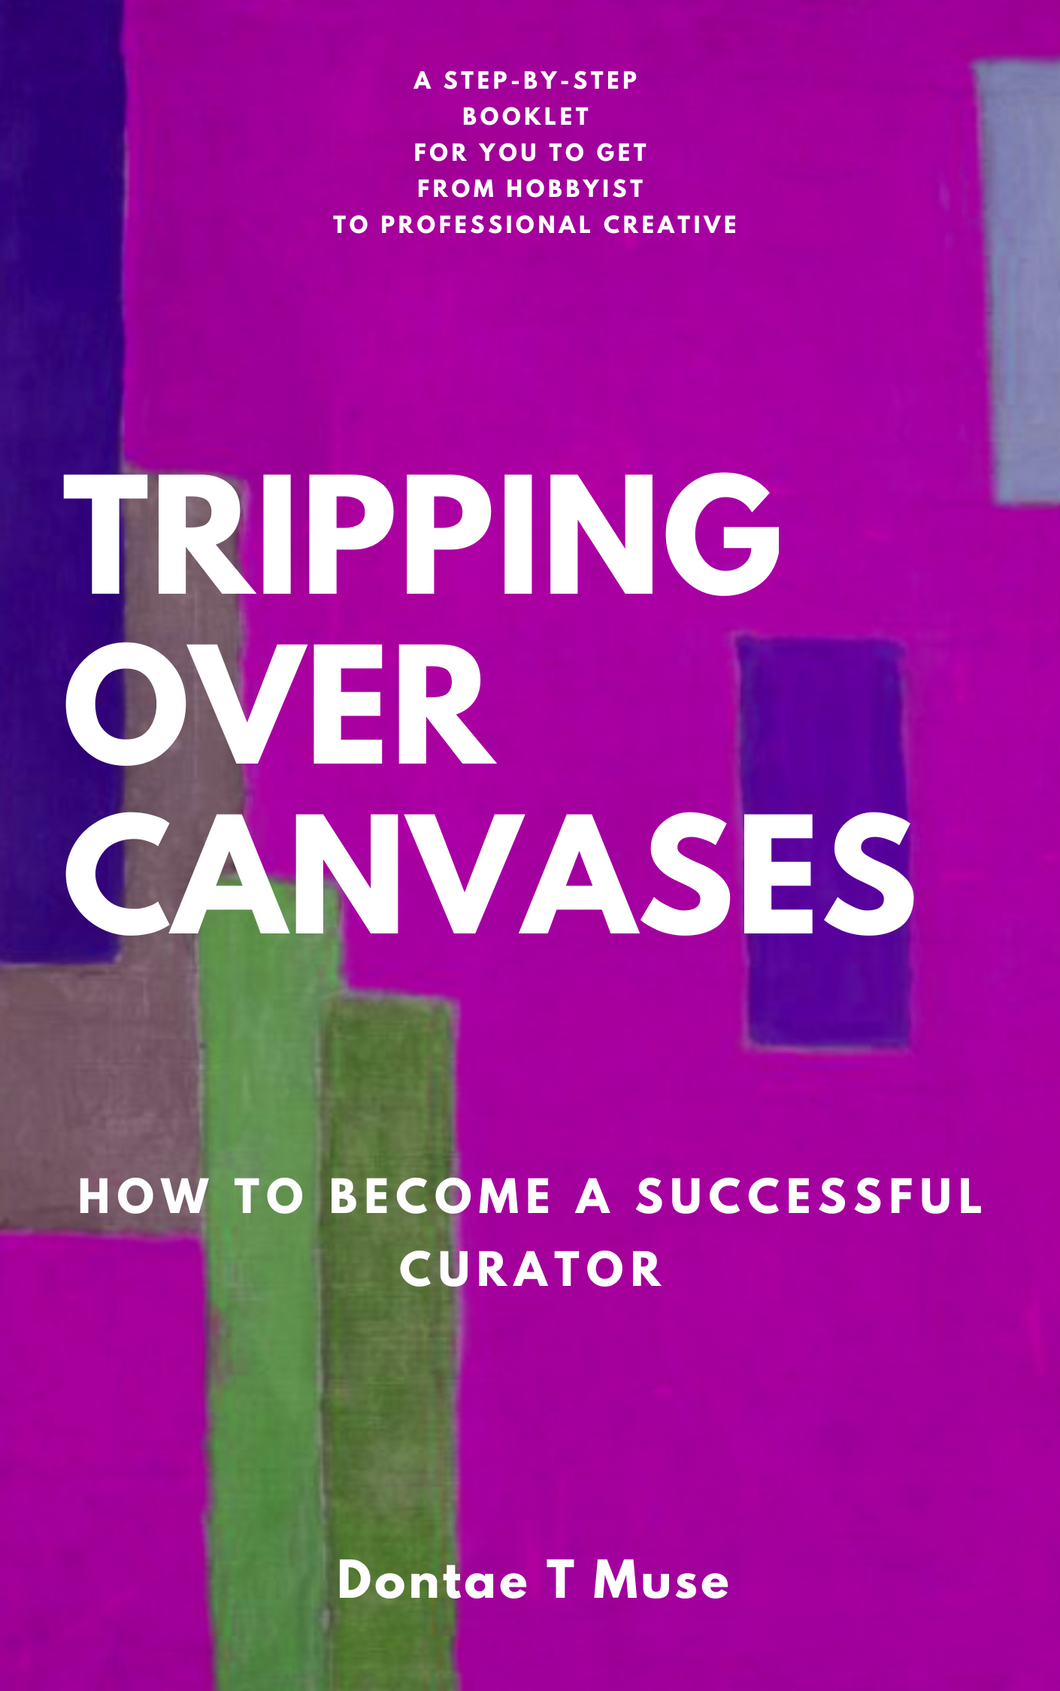 Tripping Over Canvases: How To Become A Successful Curator